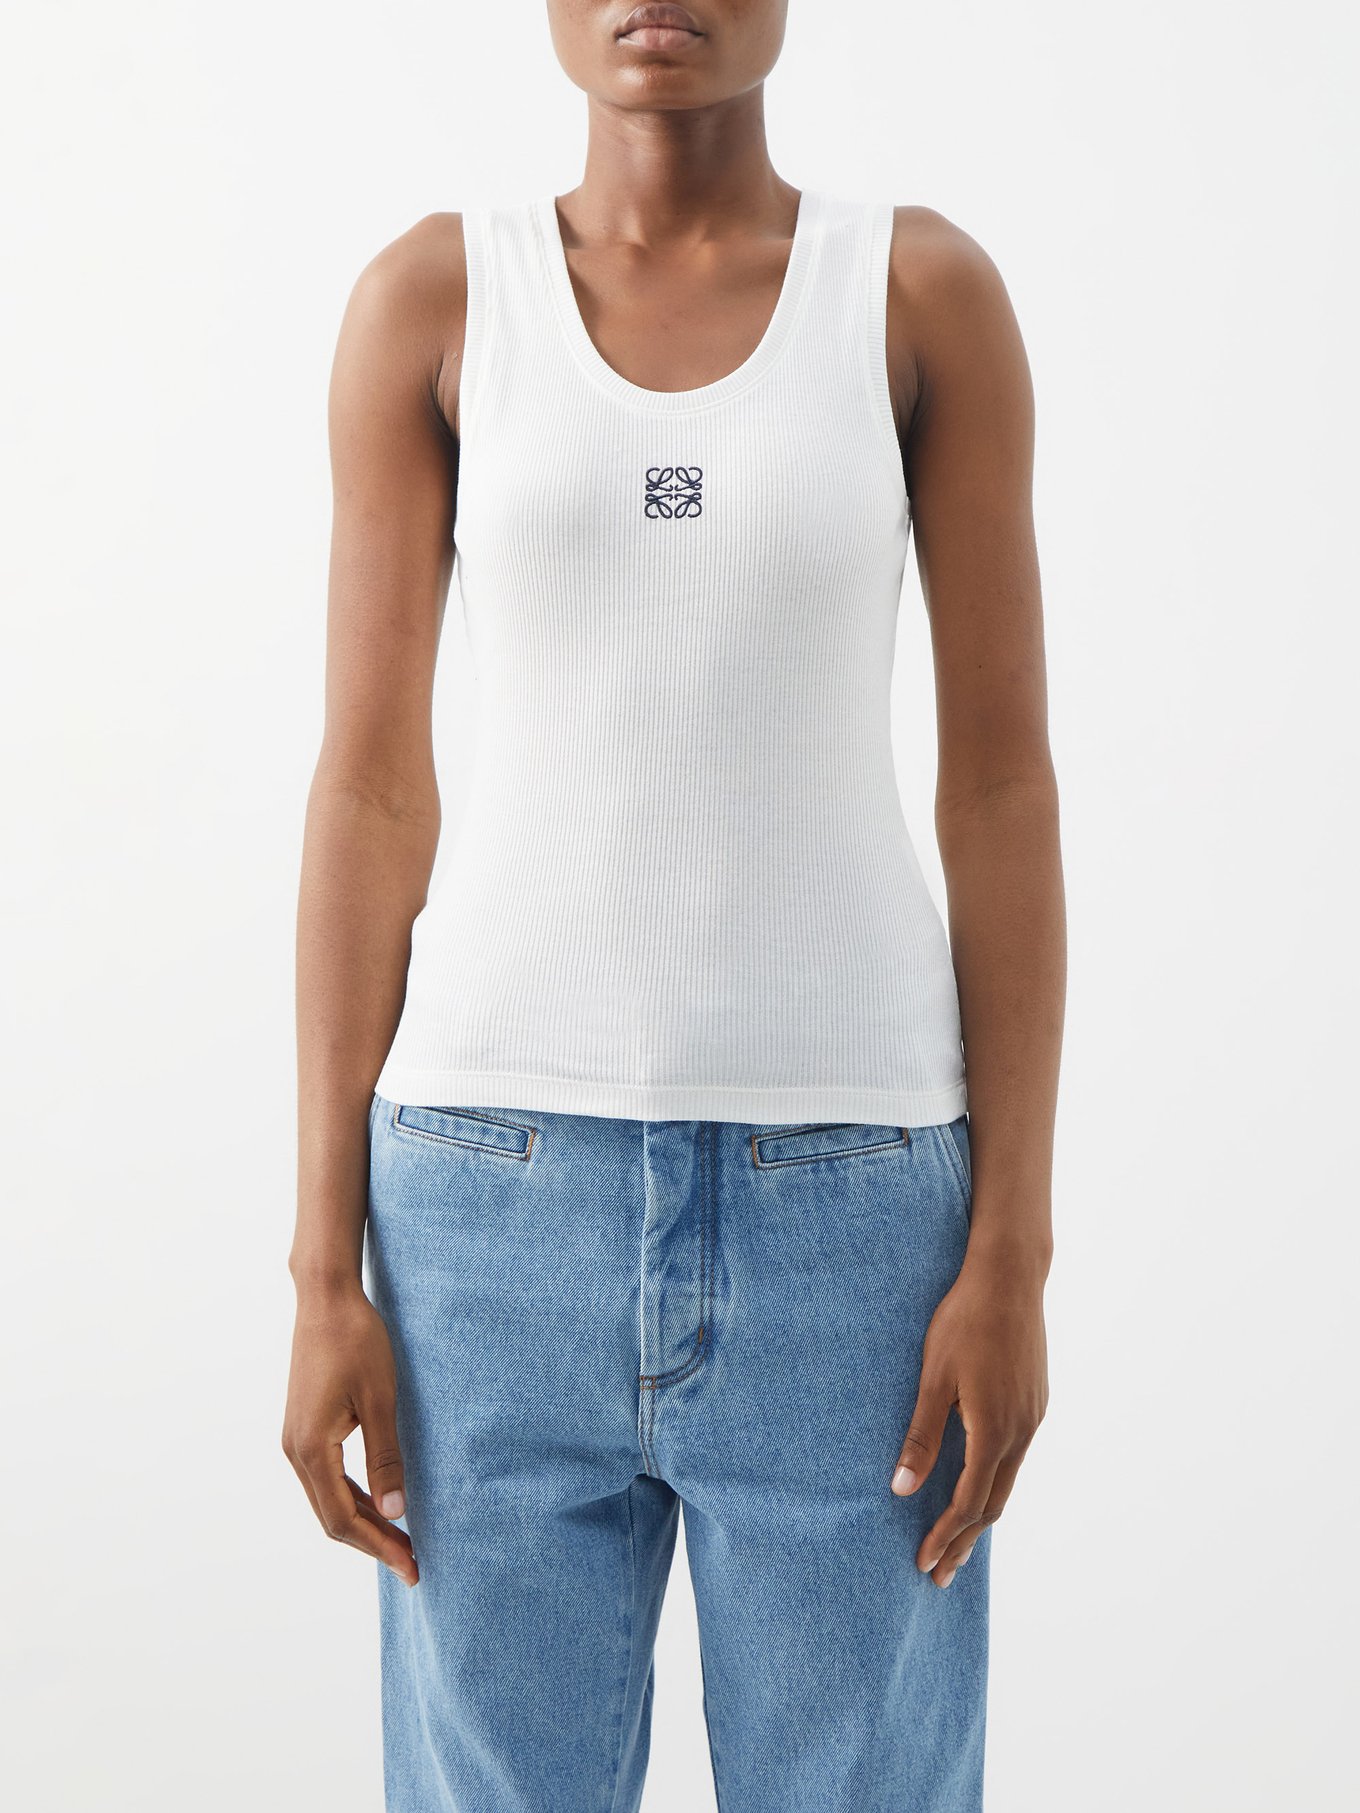 Loewe Cropped Embroidered Ribbed Stretch-cotton Jersey Tank - Women - White Tops - XS